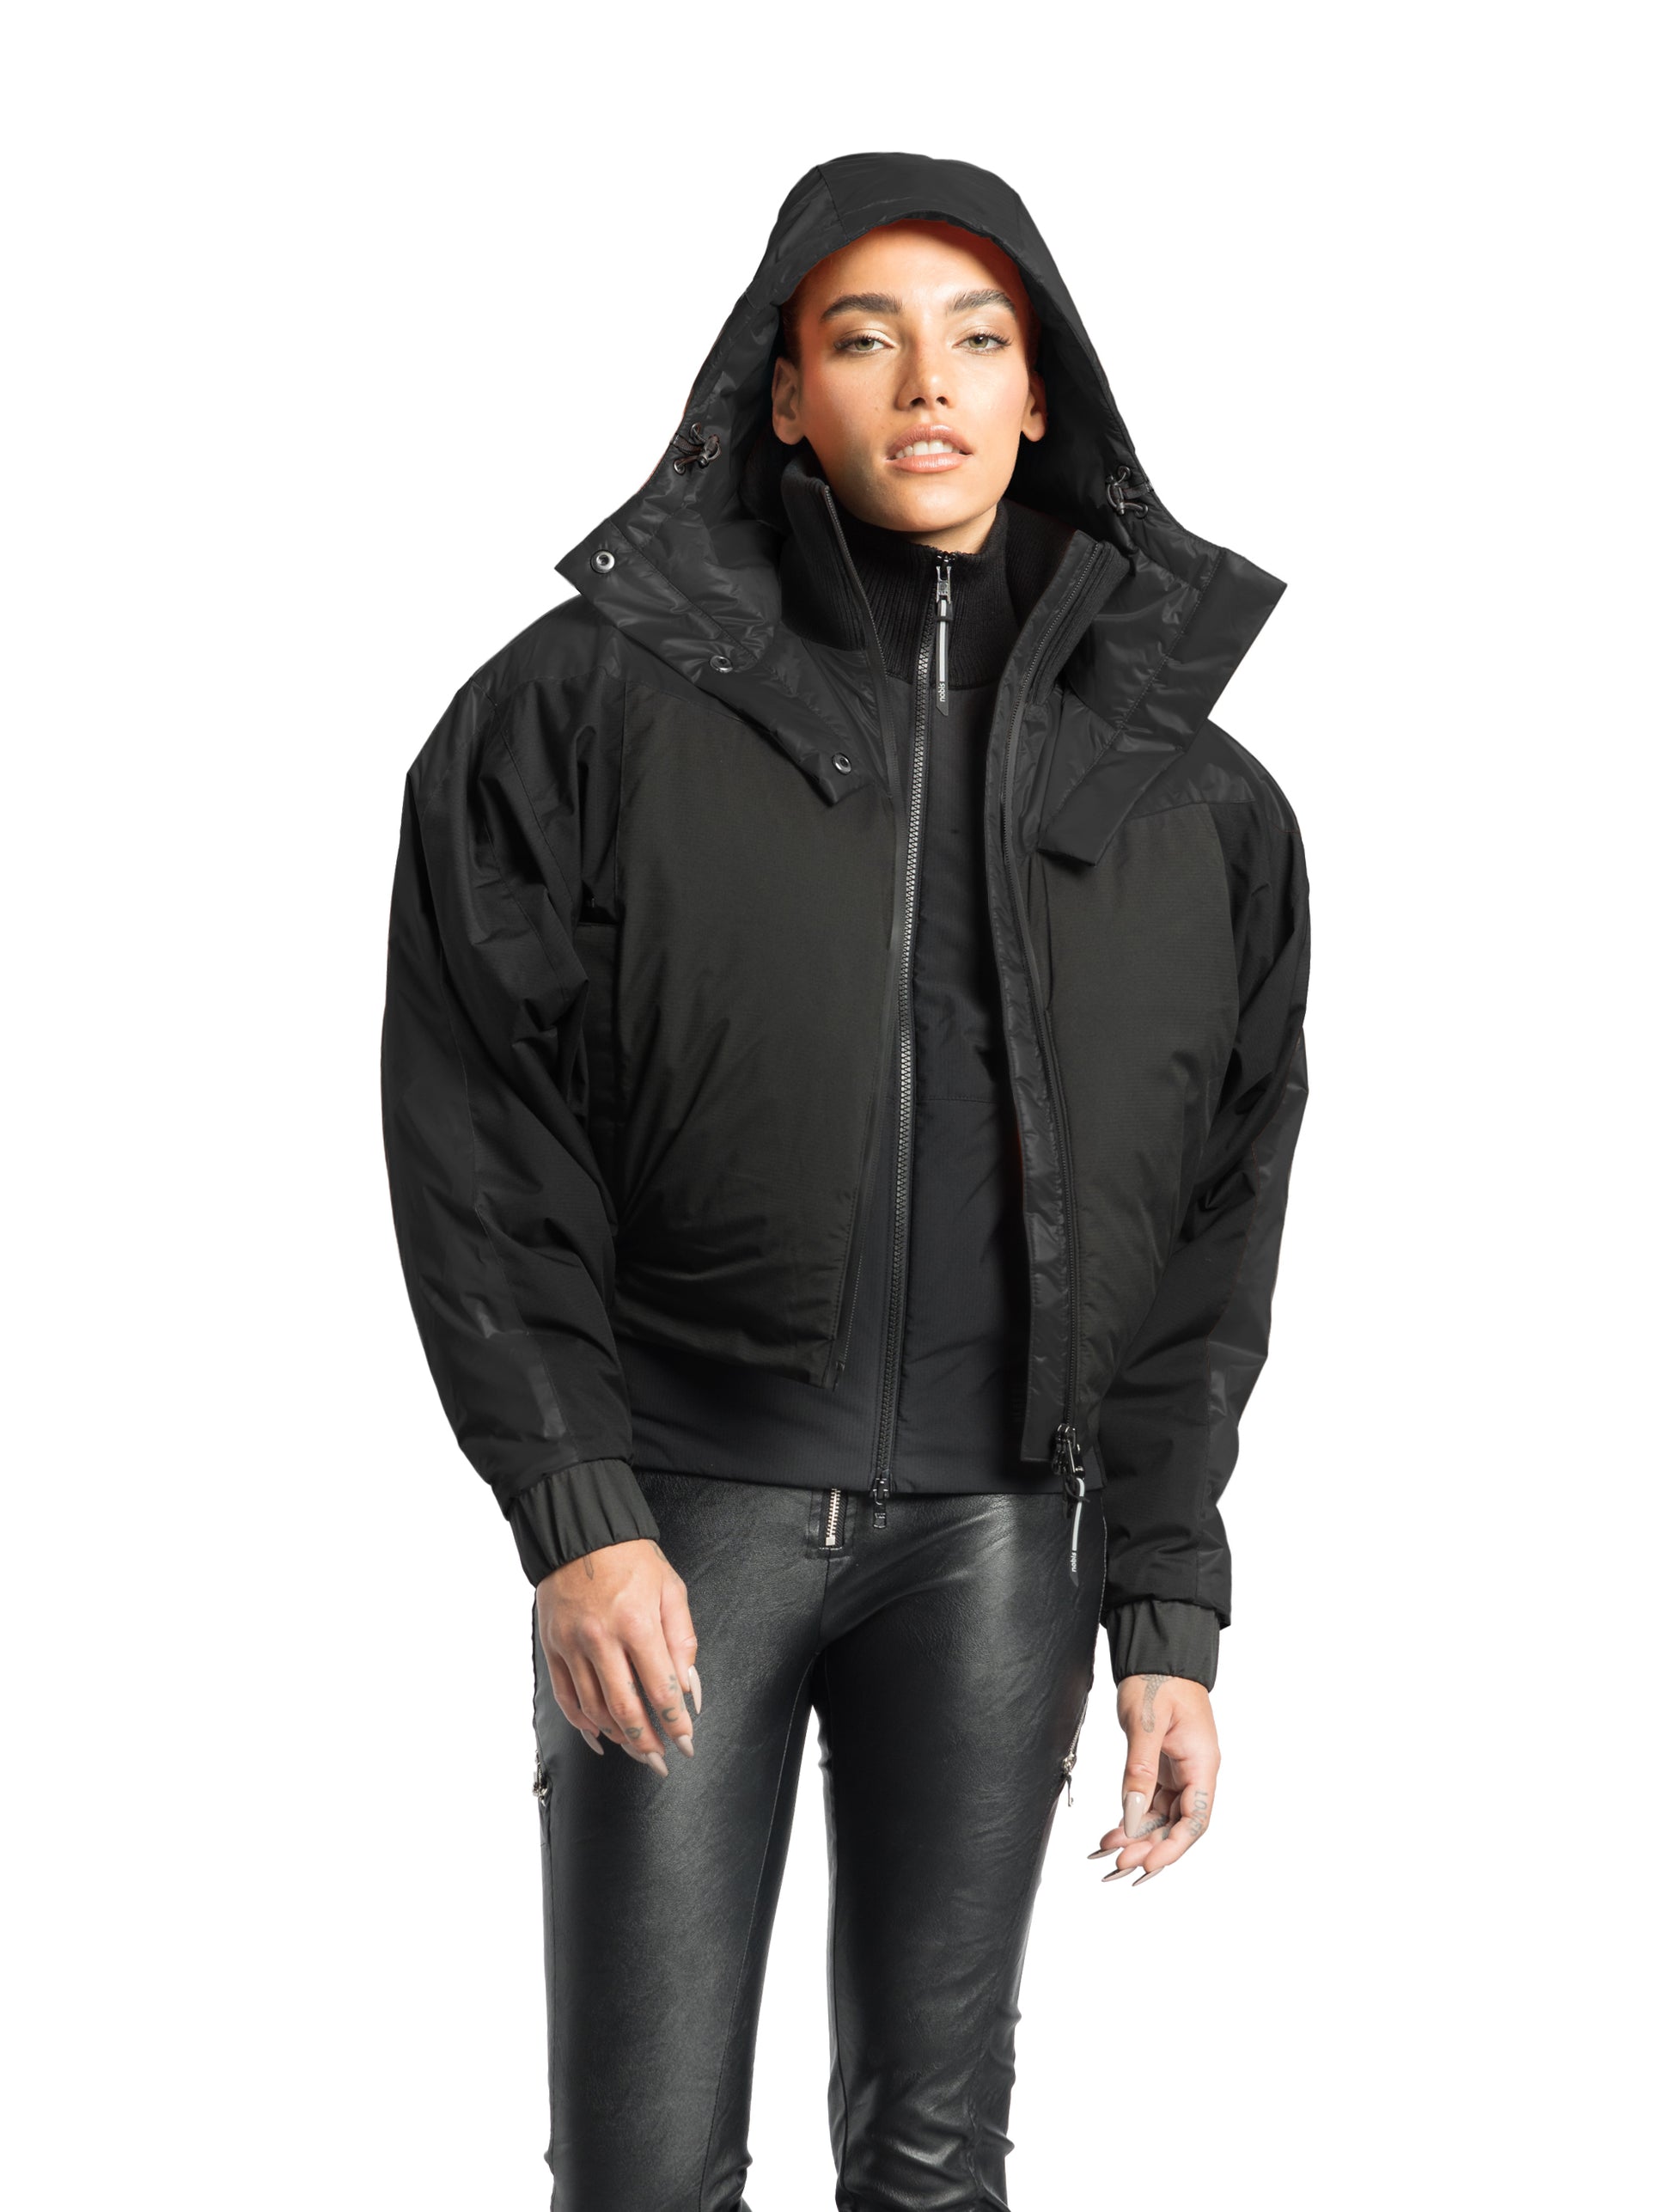 Aspen Women's Batwing Jacket in hip length, premium stretch ripstop and cire technical nylon taffeta fabrication, Premium Canadian White Duck Down insulation, non-removable down-filled hood, centre front two-way zipper, winged arm detailing, in Black